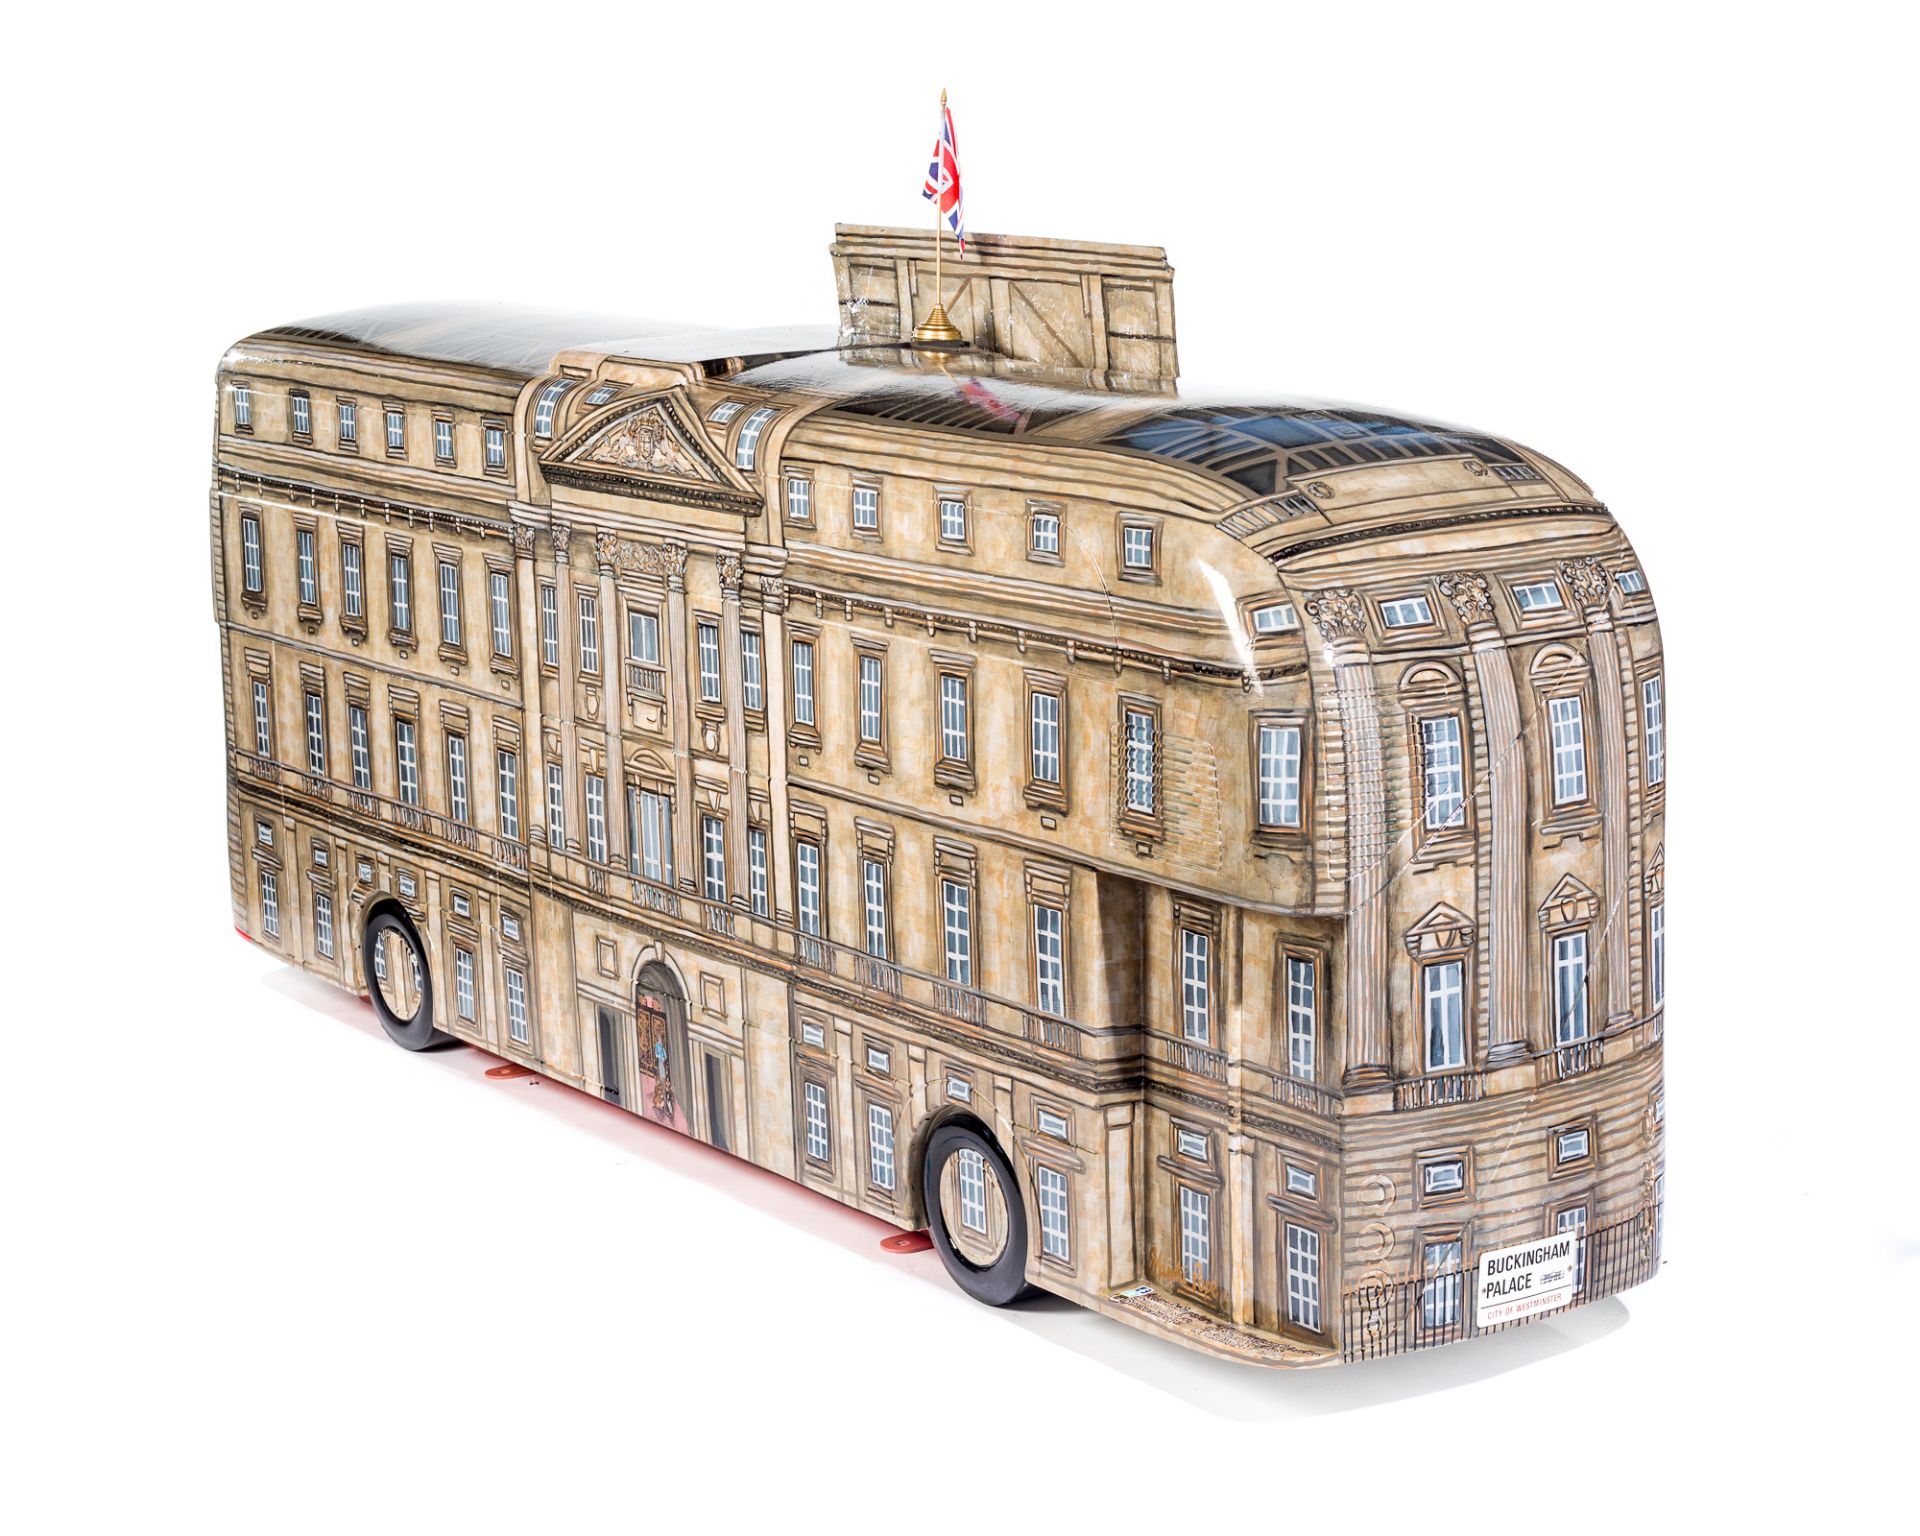 Artist: Mandii Pope  Design: Buckingham Palace Bus    About the artist   Inspired by iconic London - Image 2 of 3